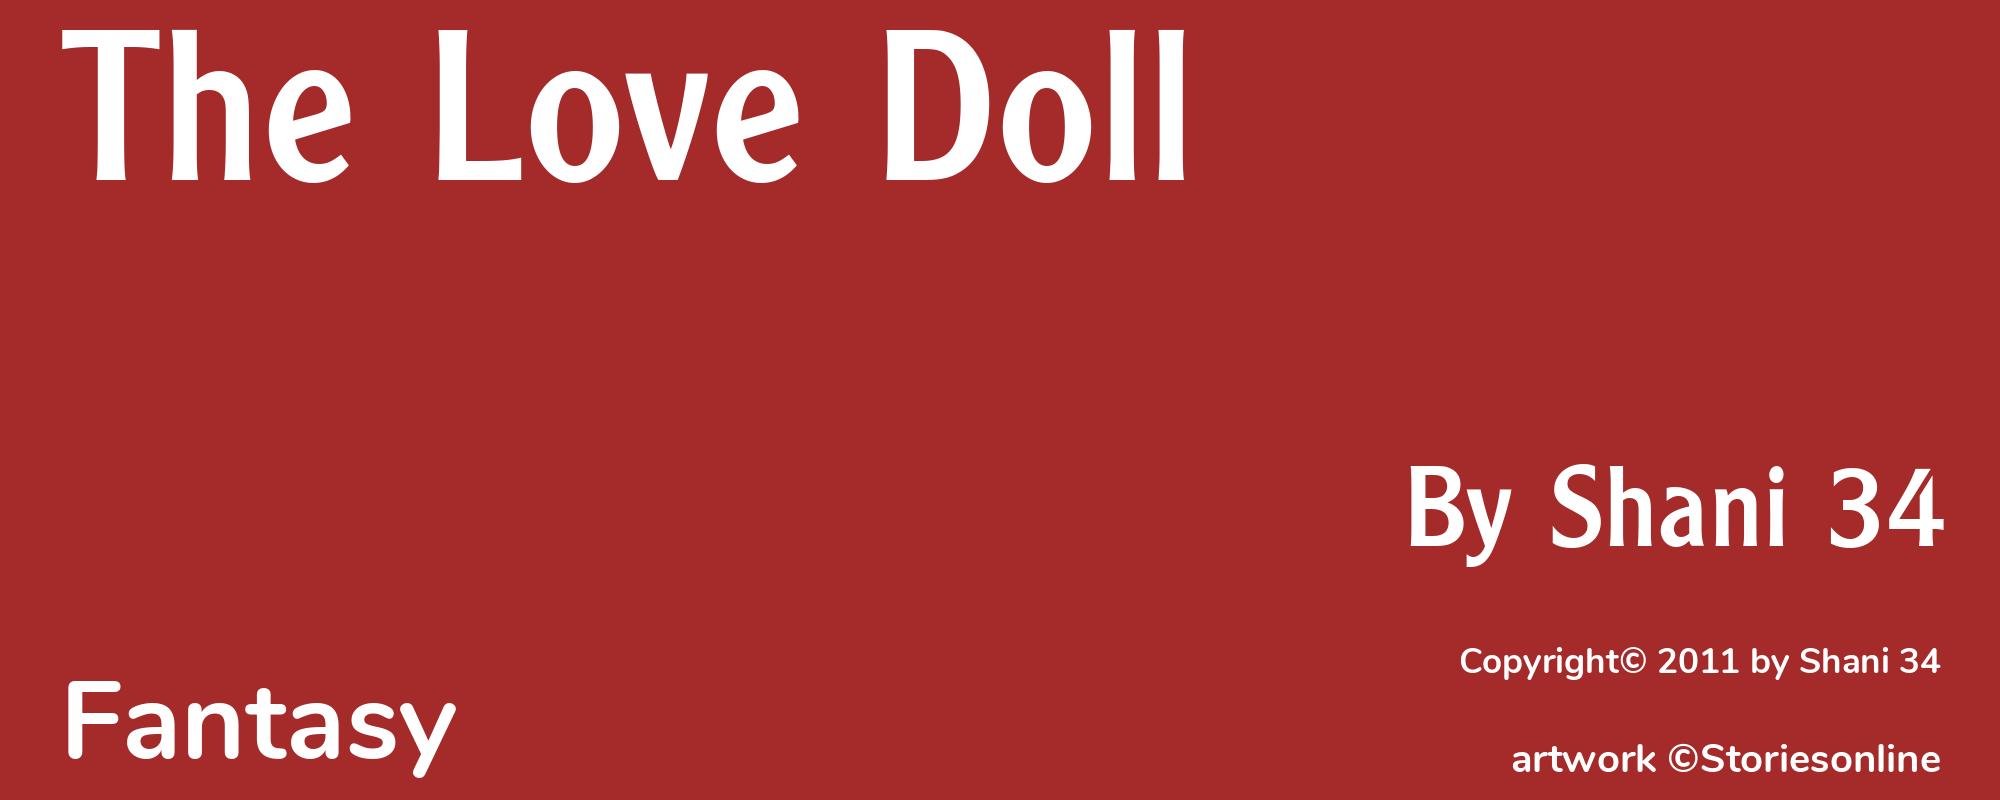 The Love Doll - Cover